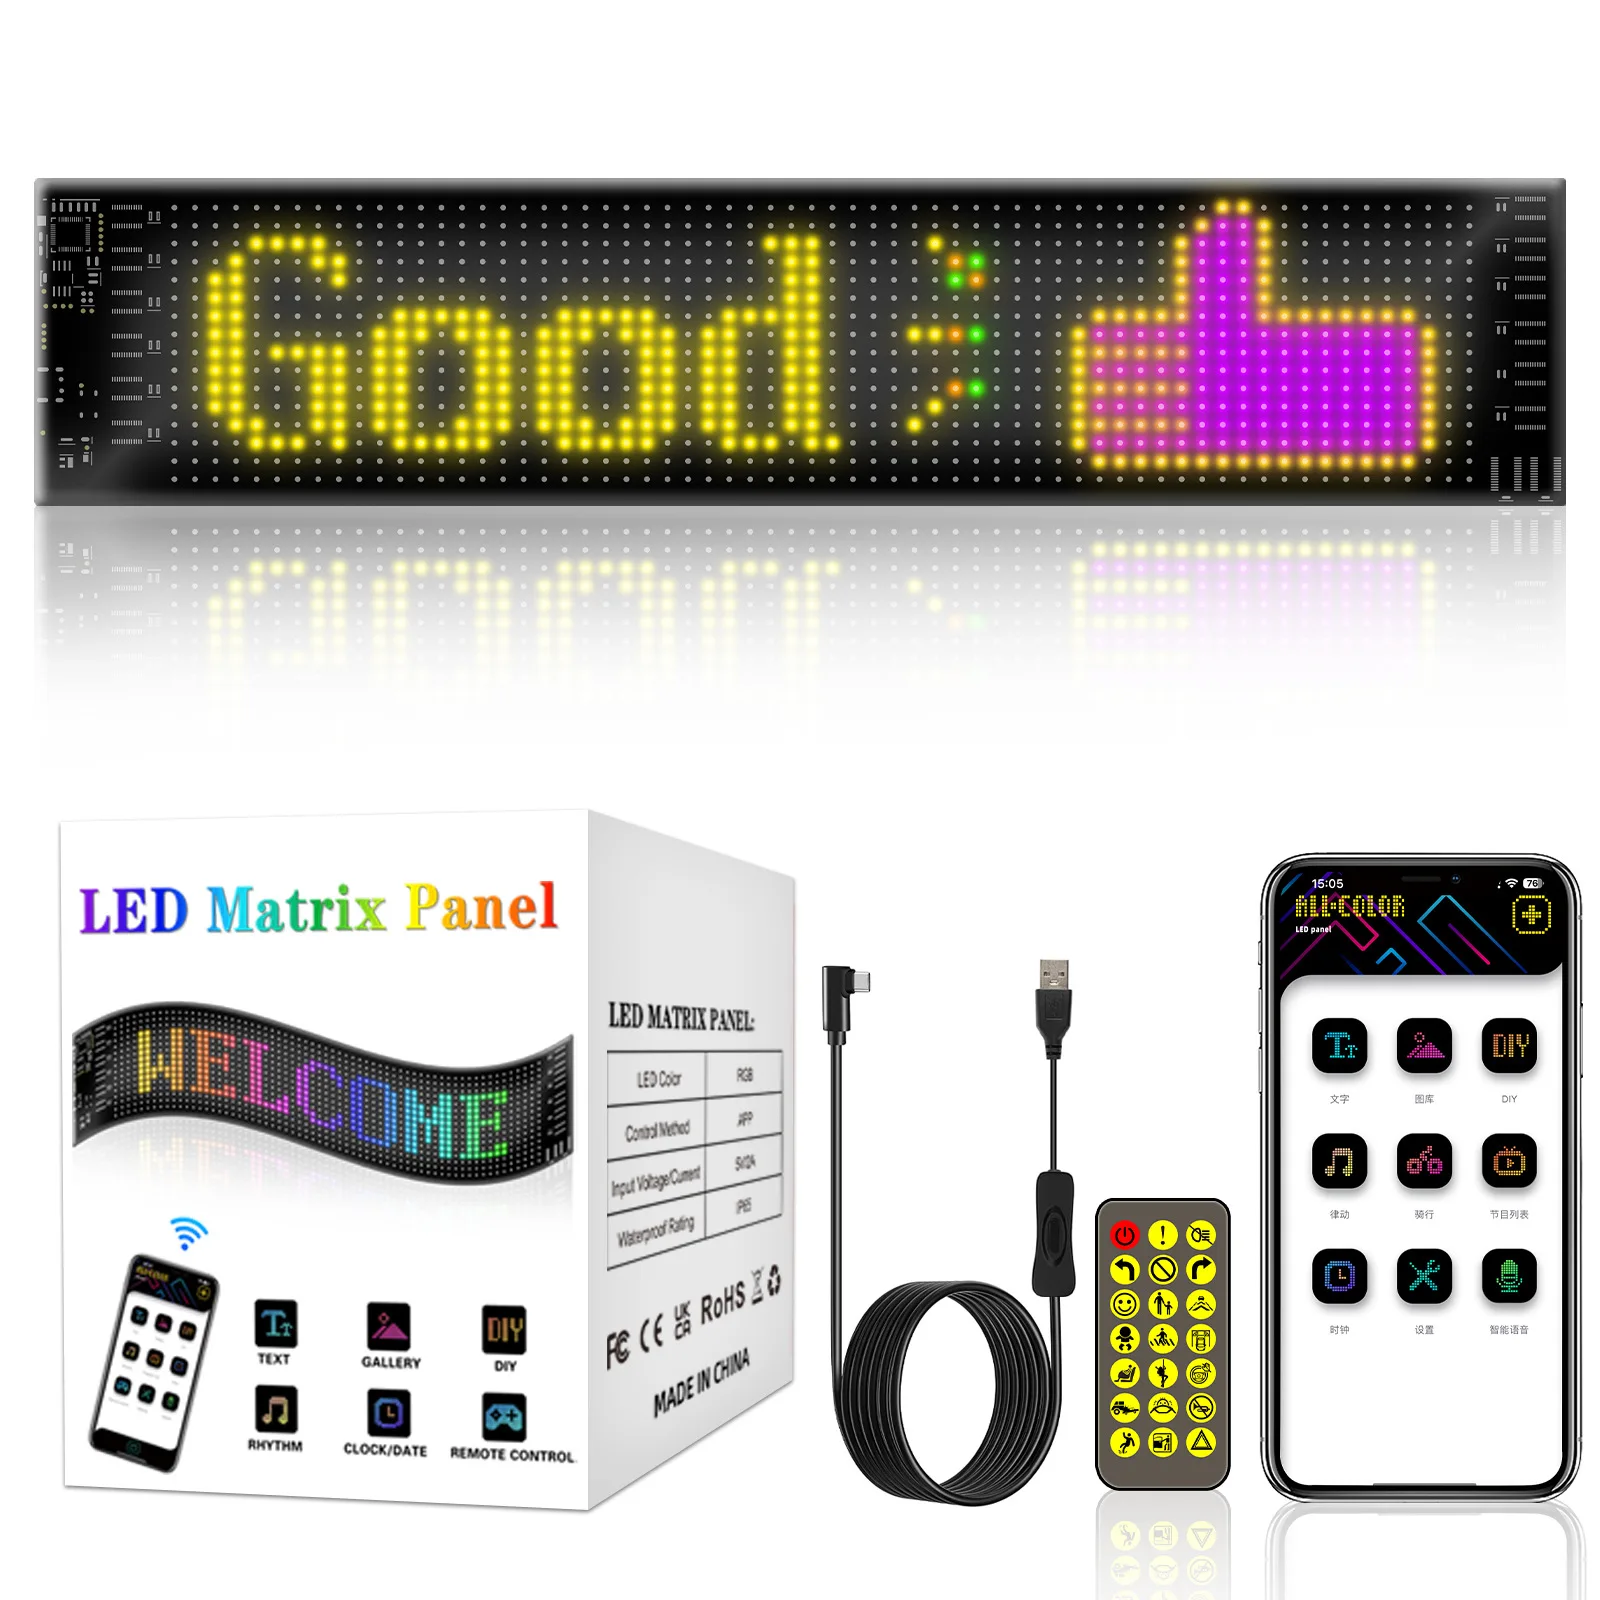 

LED Matrix Panel Lights USB 5V Scrolling Bright Advertising Flexible Display Programmable Car Sign With Bluetooth APP & Remote